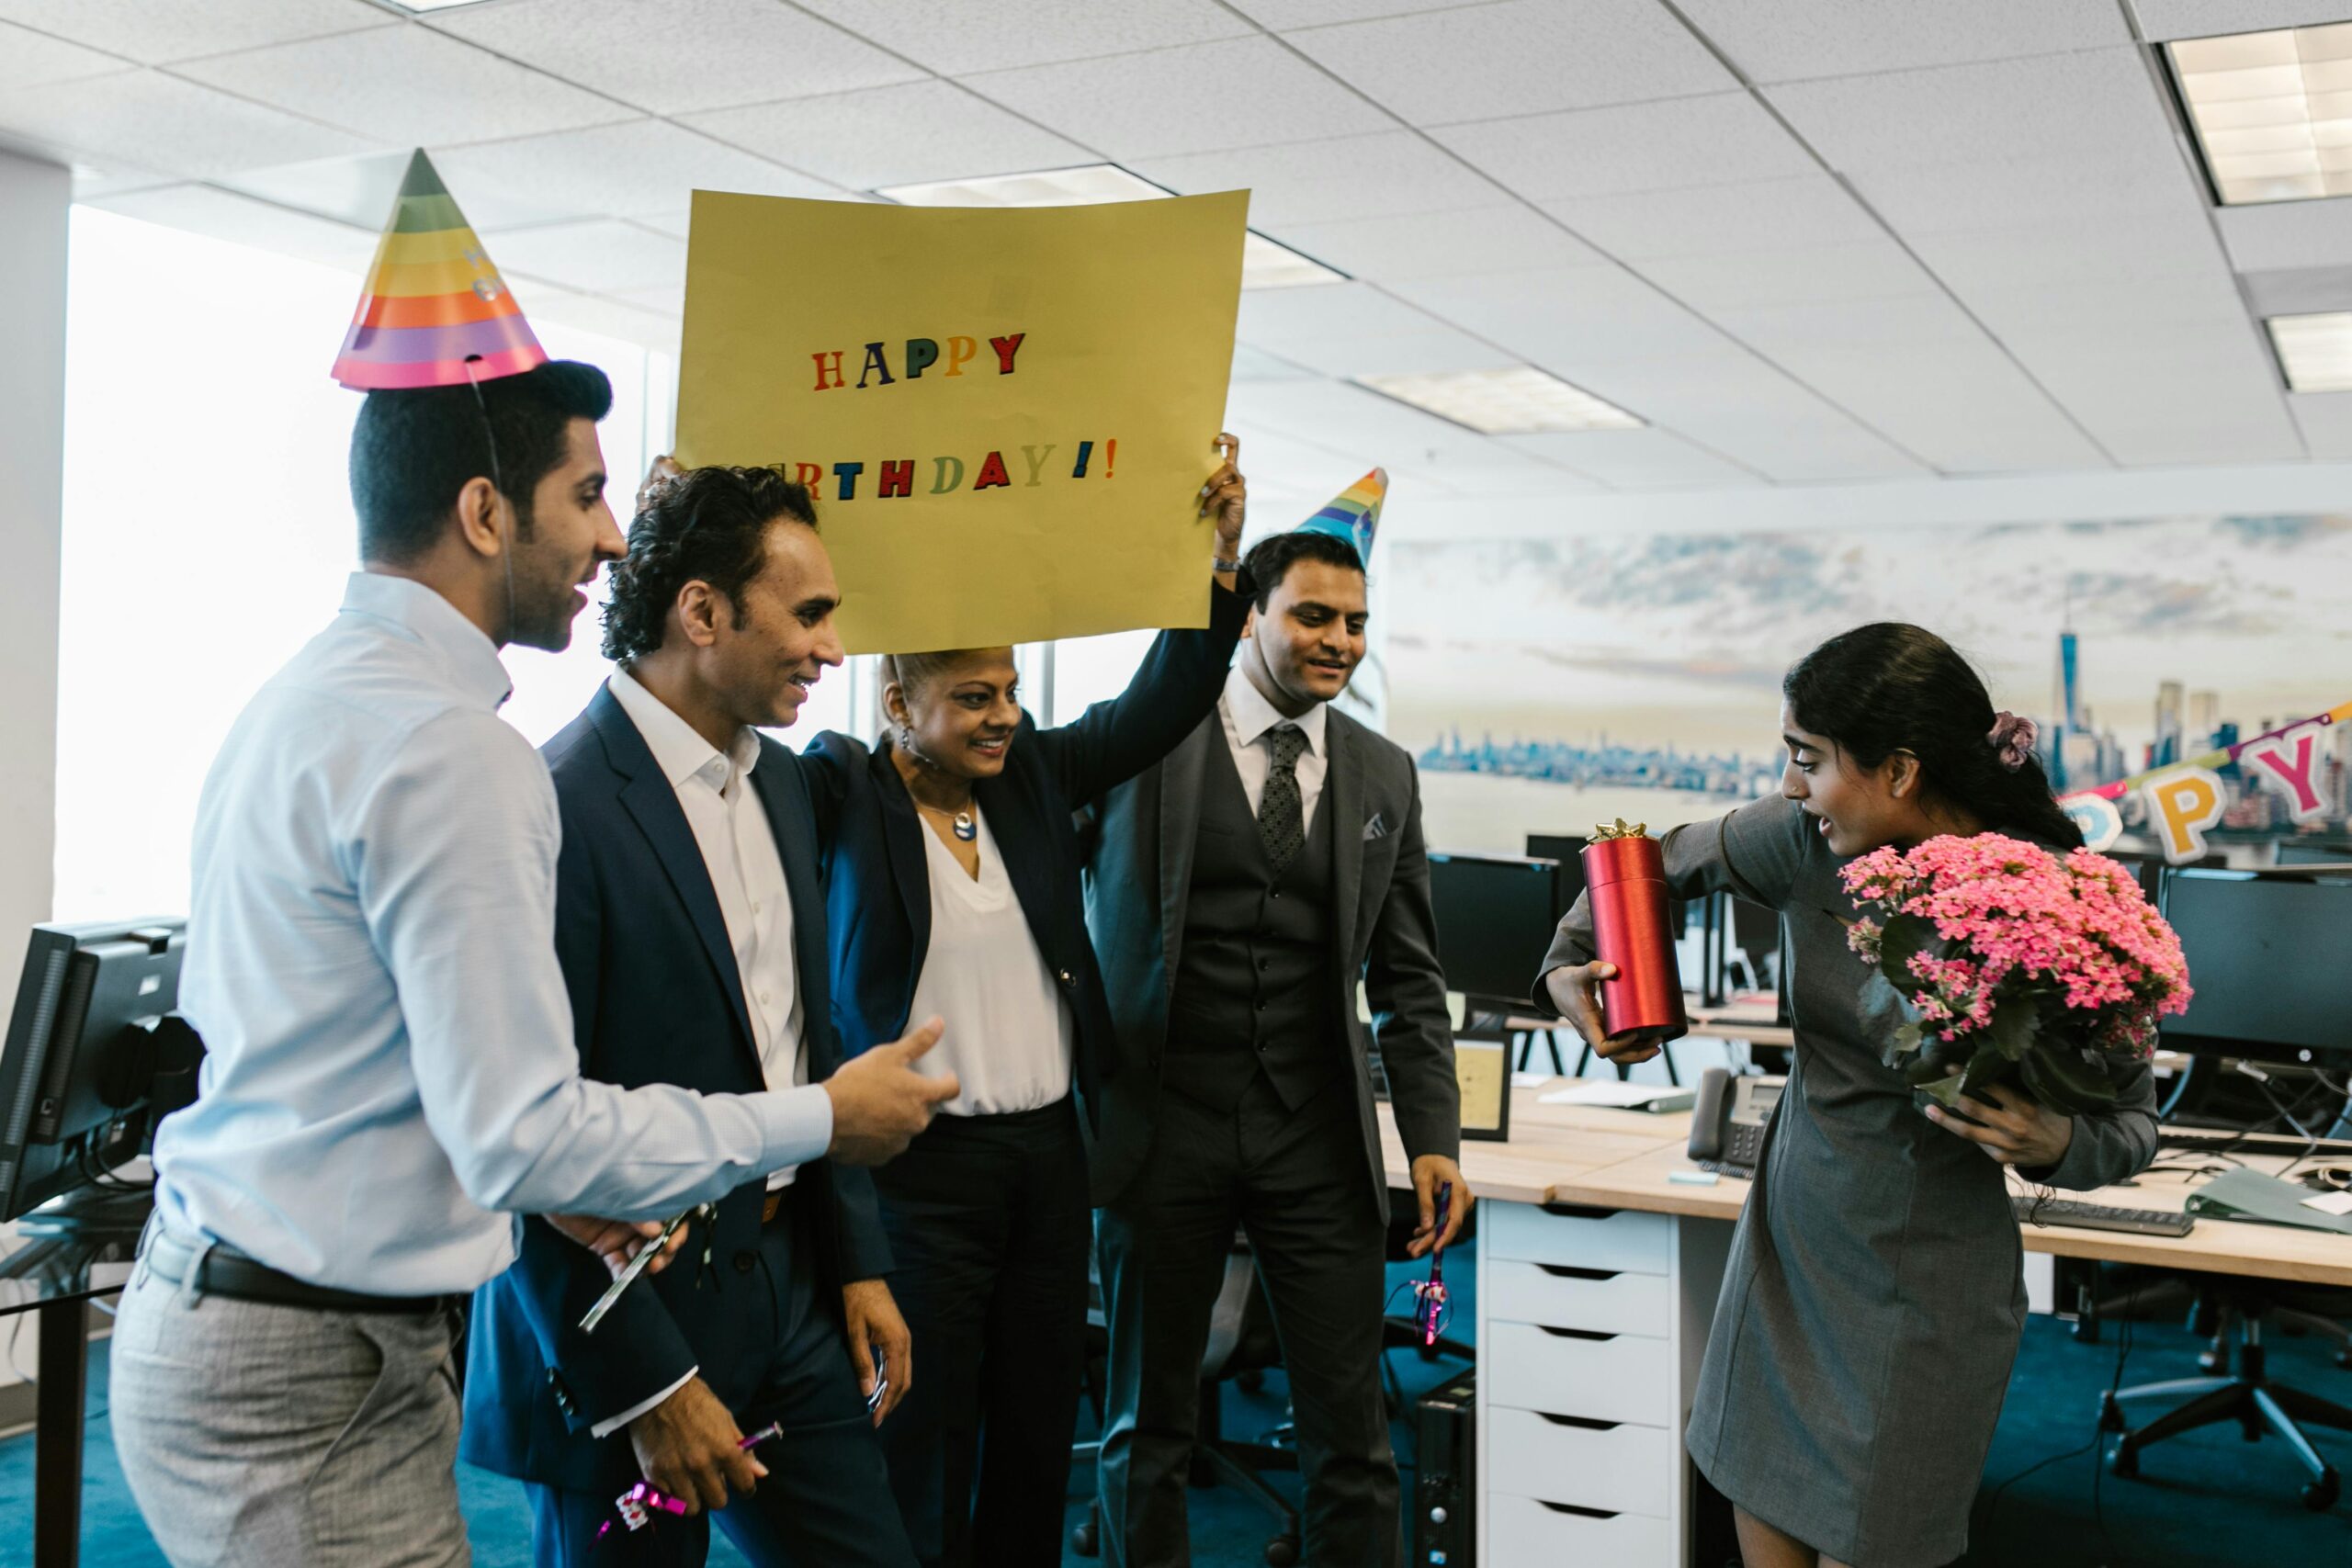 People in the office celebrating a birthday party